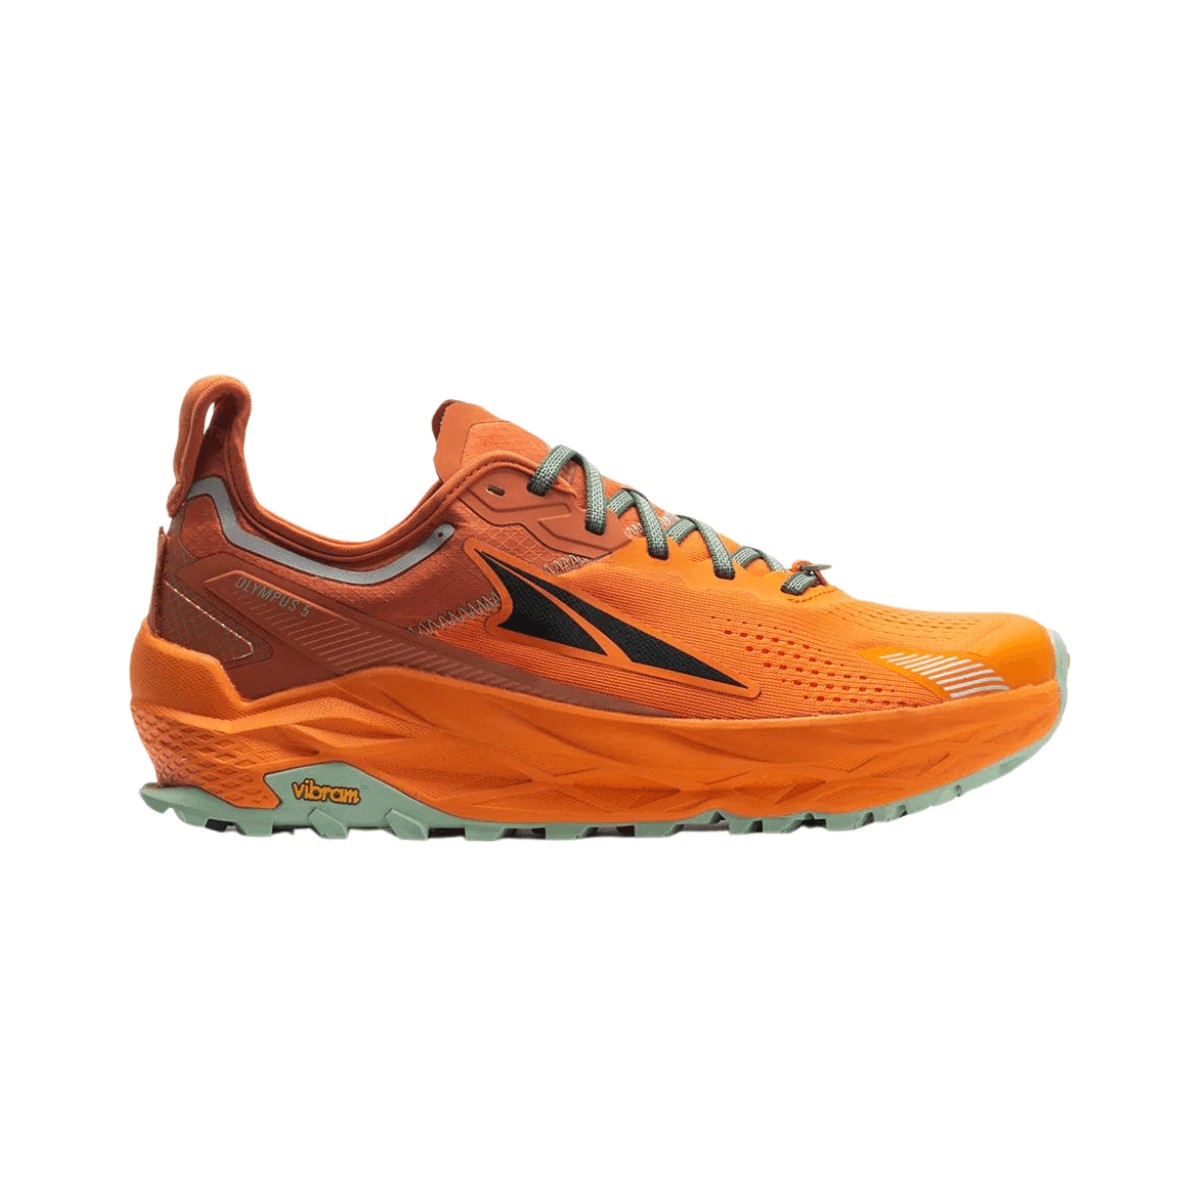 Chaussures Altra Olympus 5 Orange AW22, Taille 41 - EUR